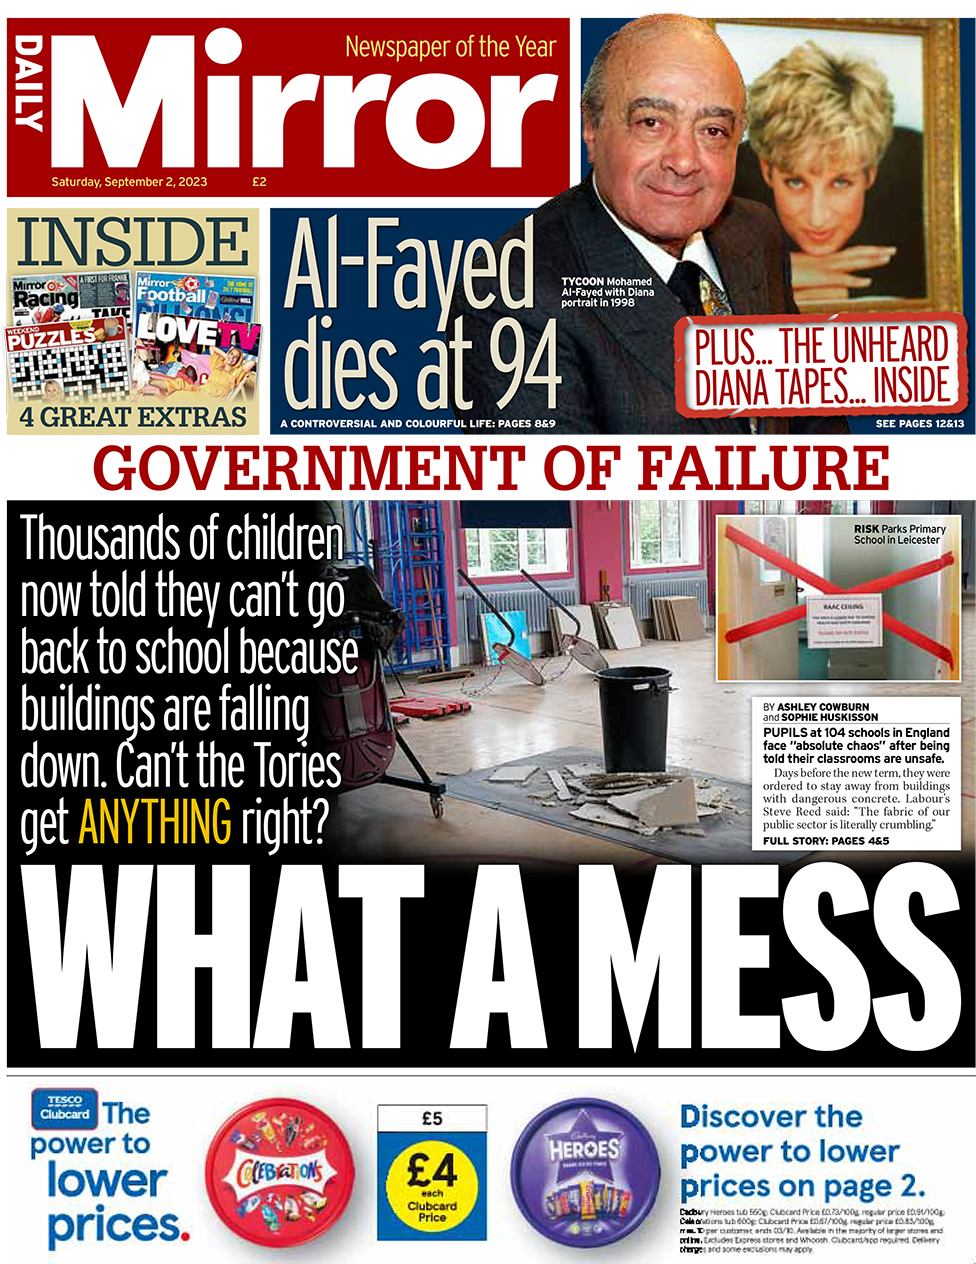 The front page of the Daily Mirror